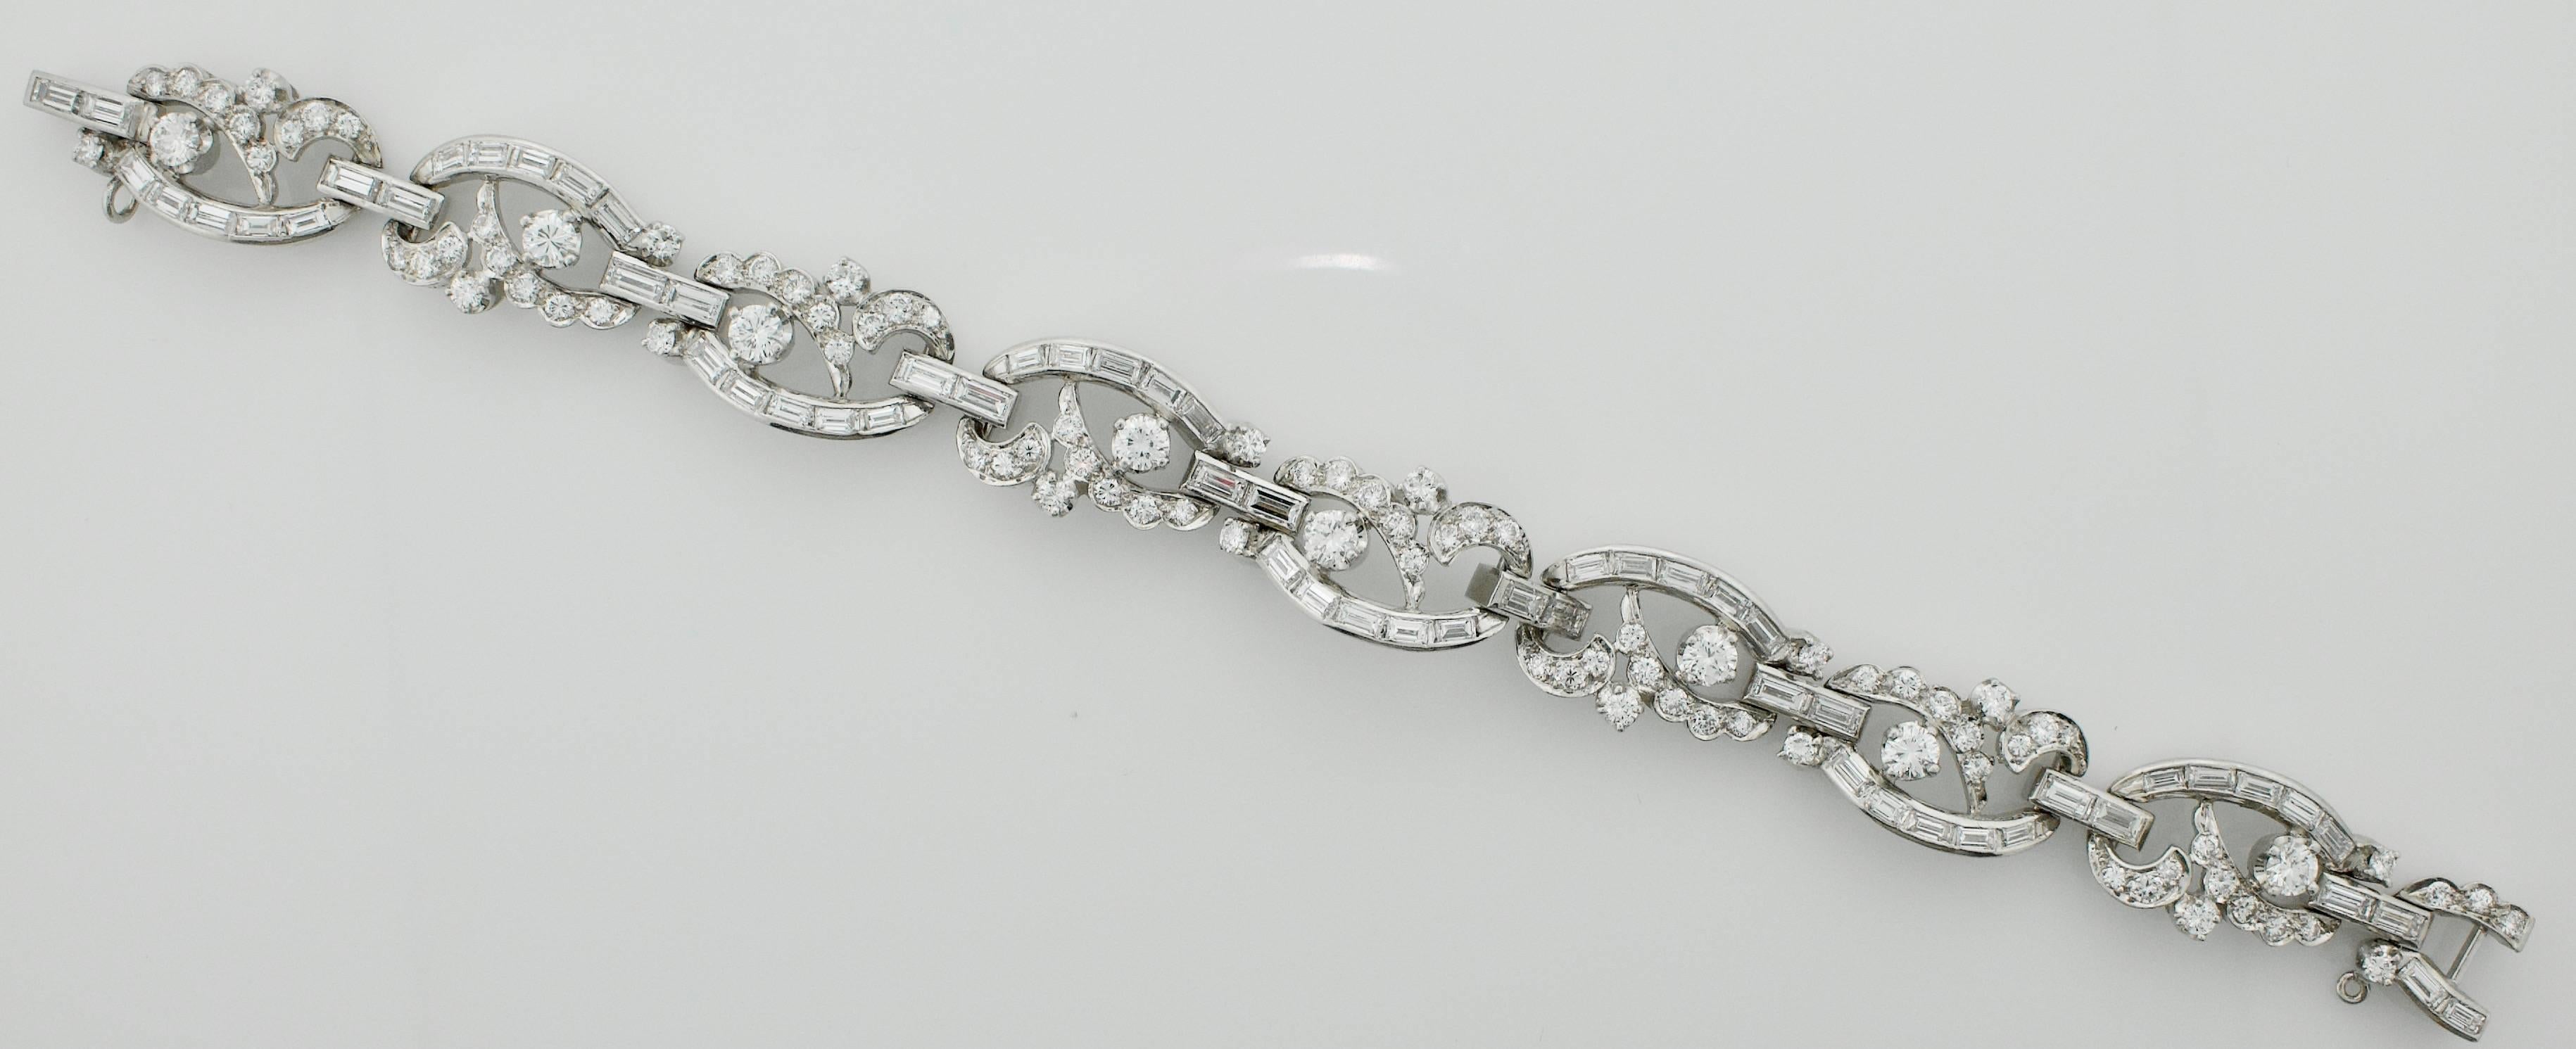 Step back in time with our Lady’s Platinum Diamond Circa 1940's Bracelet, a true testament to the glamour and sophistication of the Art Deco era.

Crafted with exquisite attention to detail, this stunning bracelet features an array of dazzling